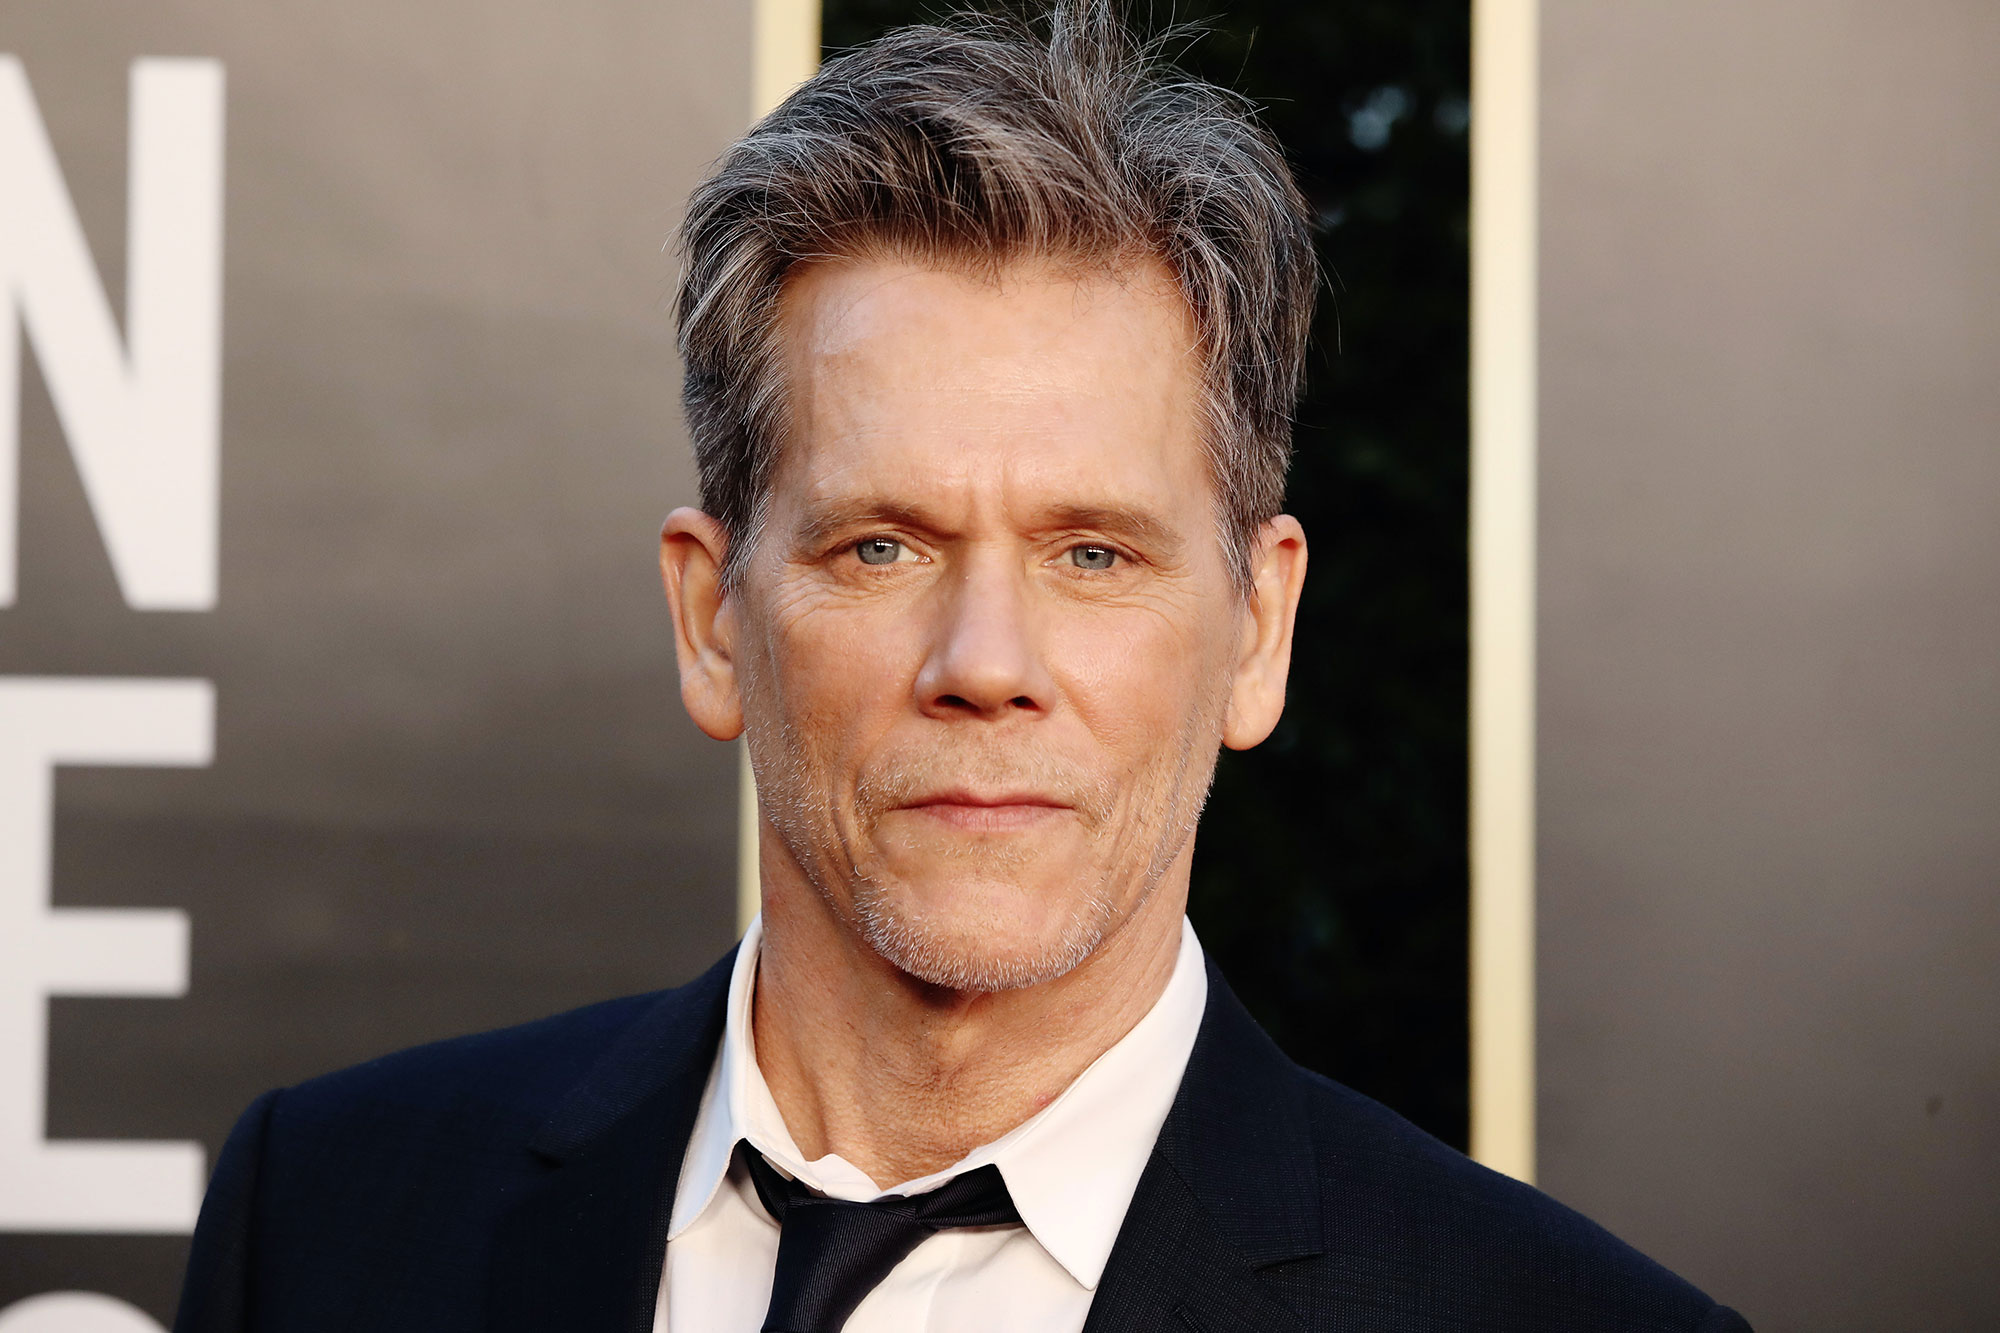 Kevin Bacon attends the 78th Annual Golden Globe Awards held at The Beverly Hilton and broadcast on February 28, 2021 in Beverly Hills, California.